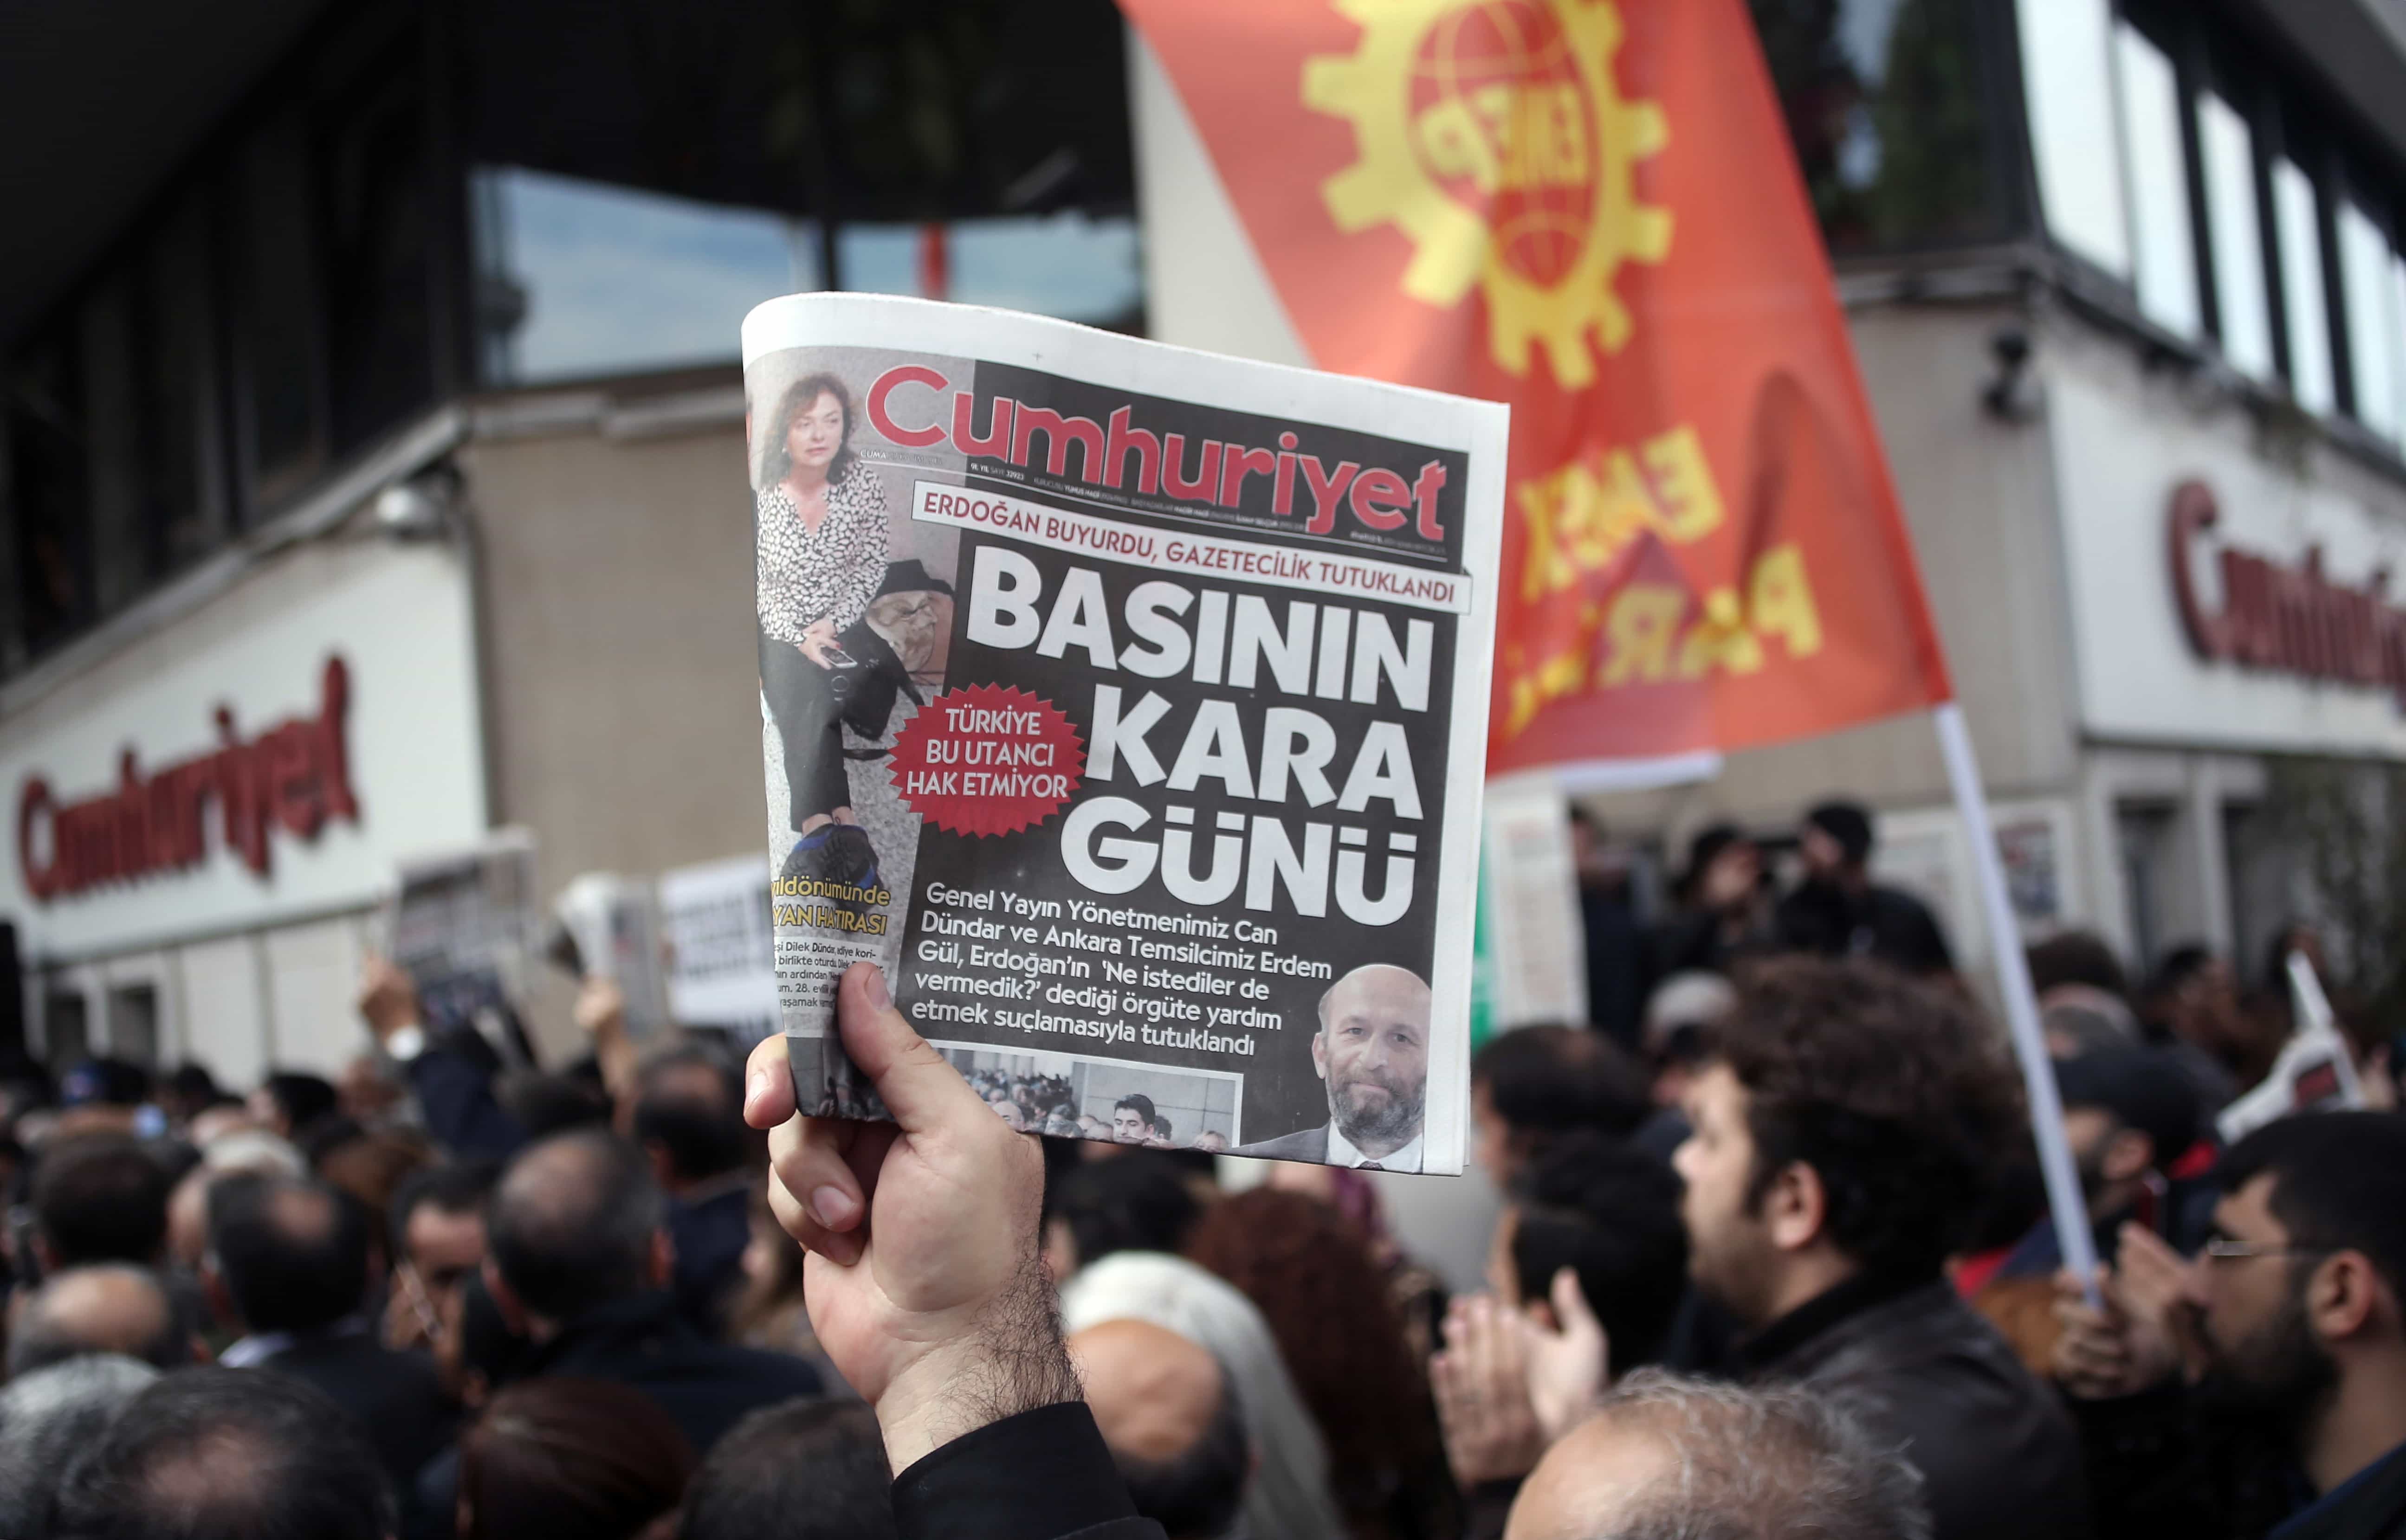 People gather to protest the jailing of opposition Cumhuriyet newspaper's editor-in-chief Can Dundar and Ankara representative Erdem Gul, in Istanbul, 27 November 2015, Can Erok/Cumhuriyet via AP